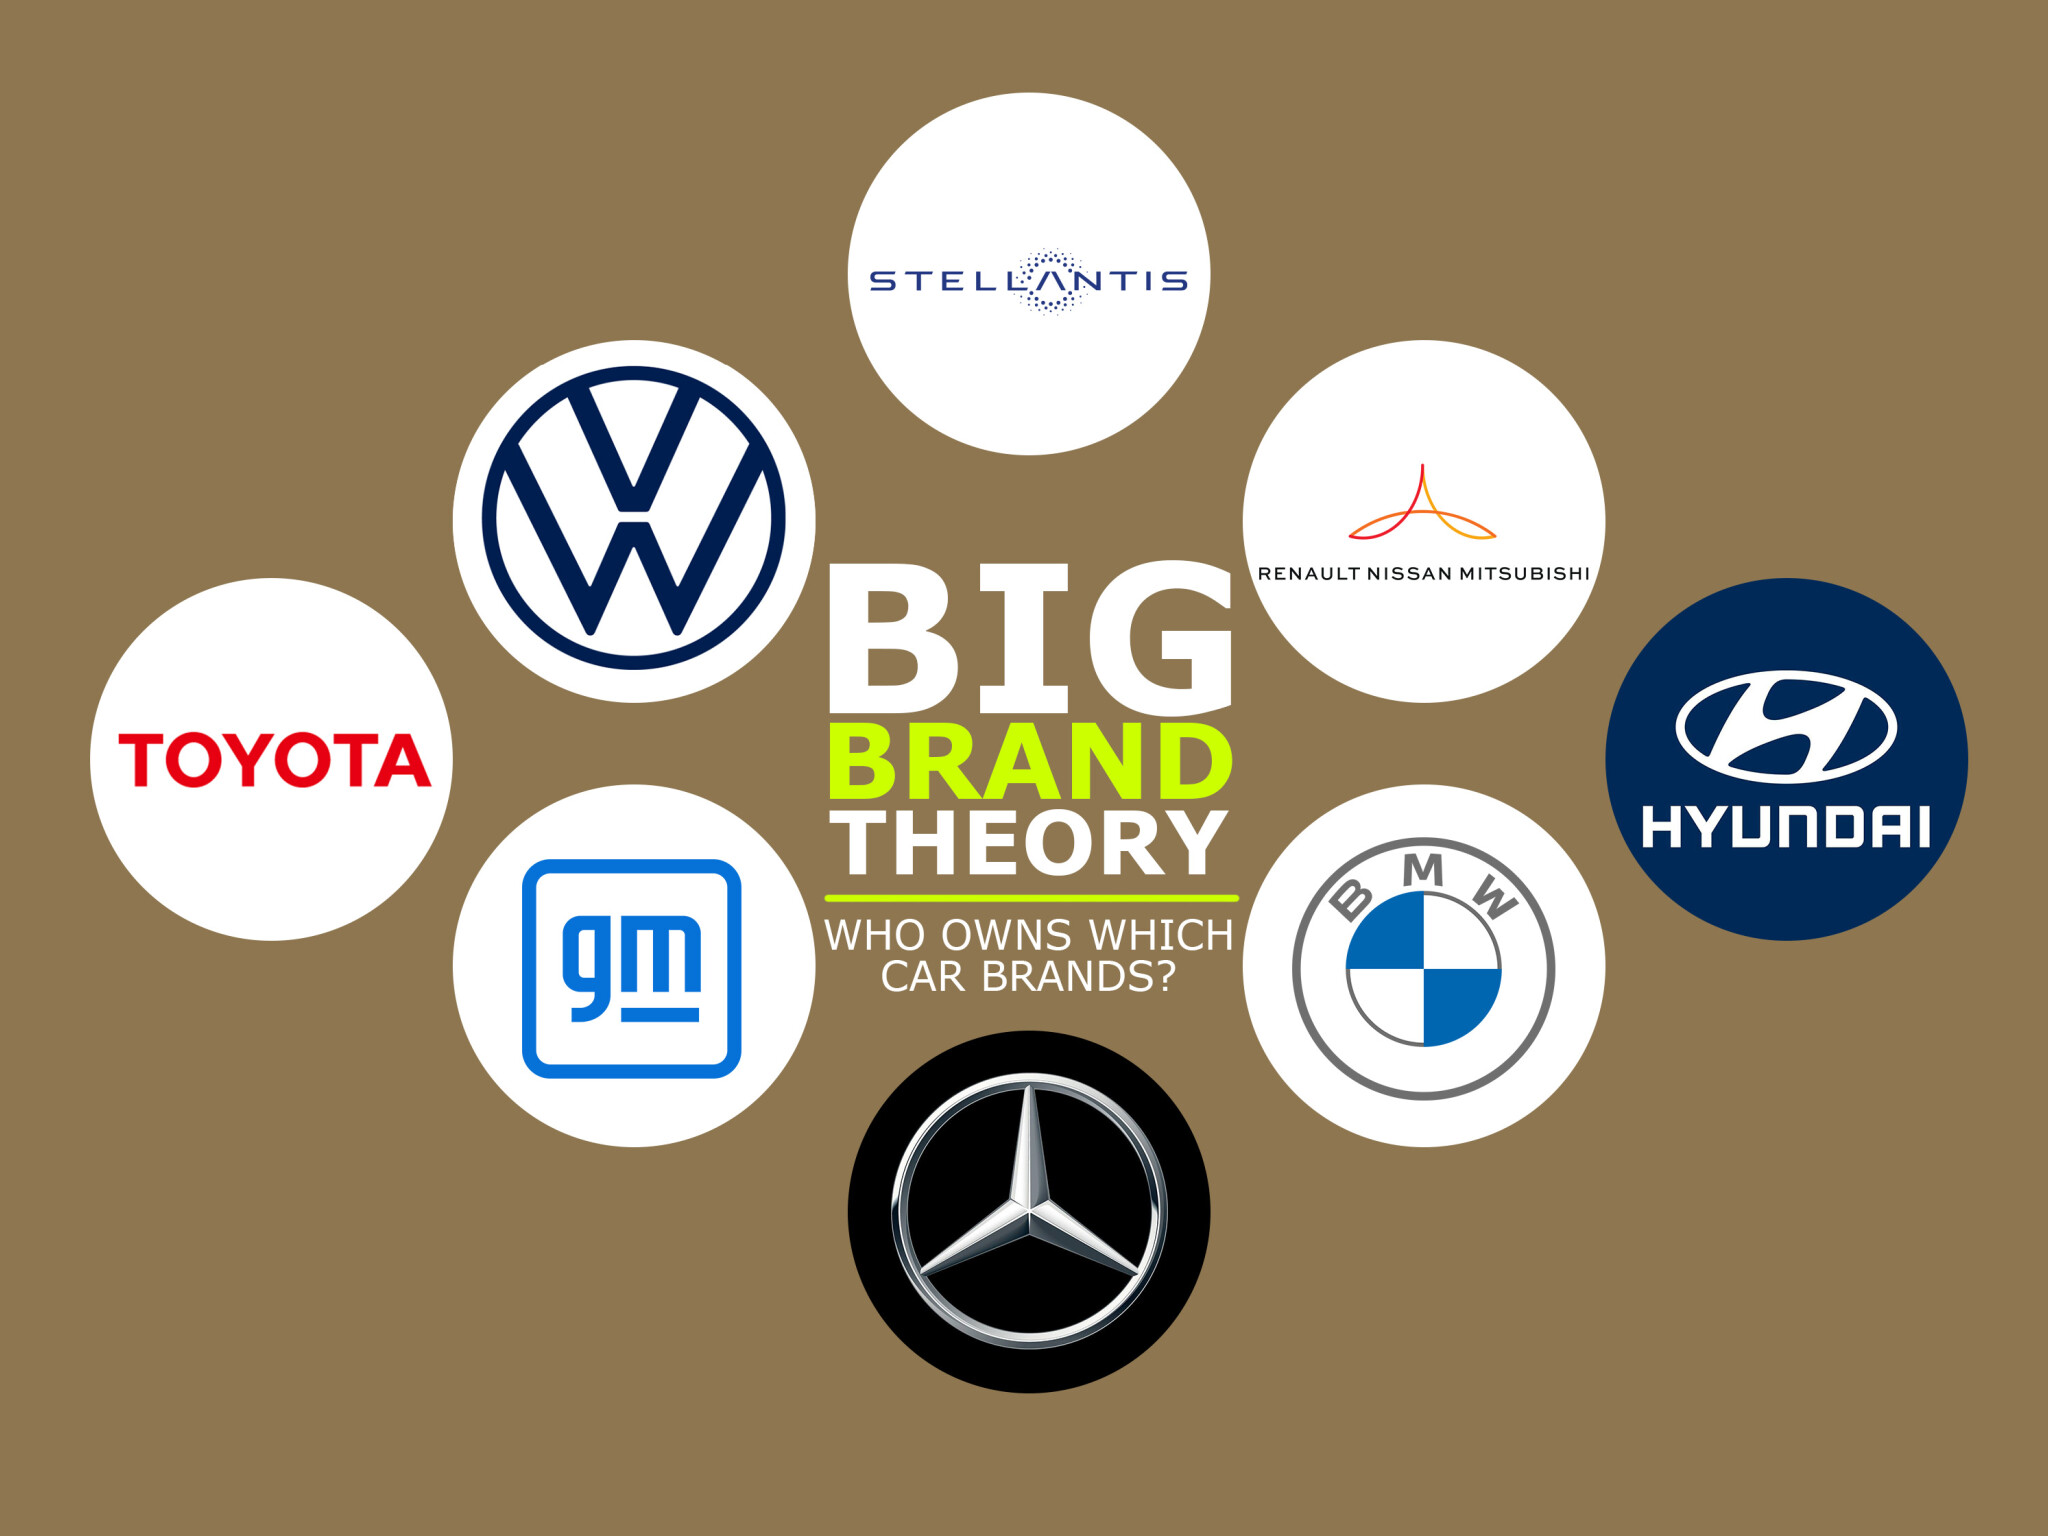 More carmakers join Open Automotive Alliance with Google